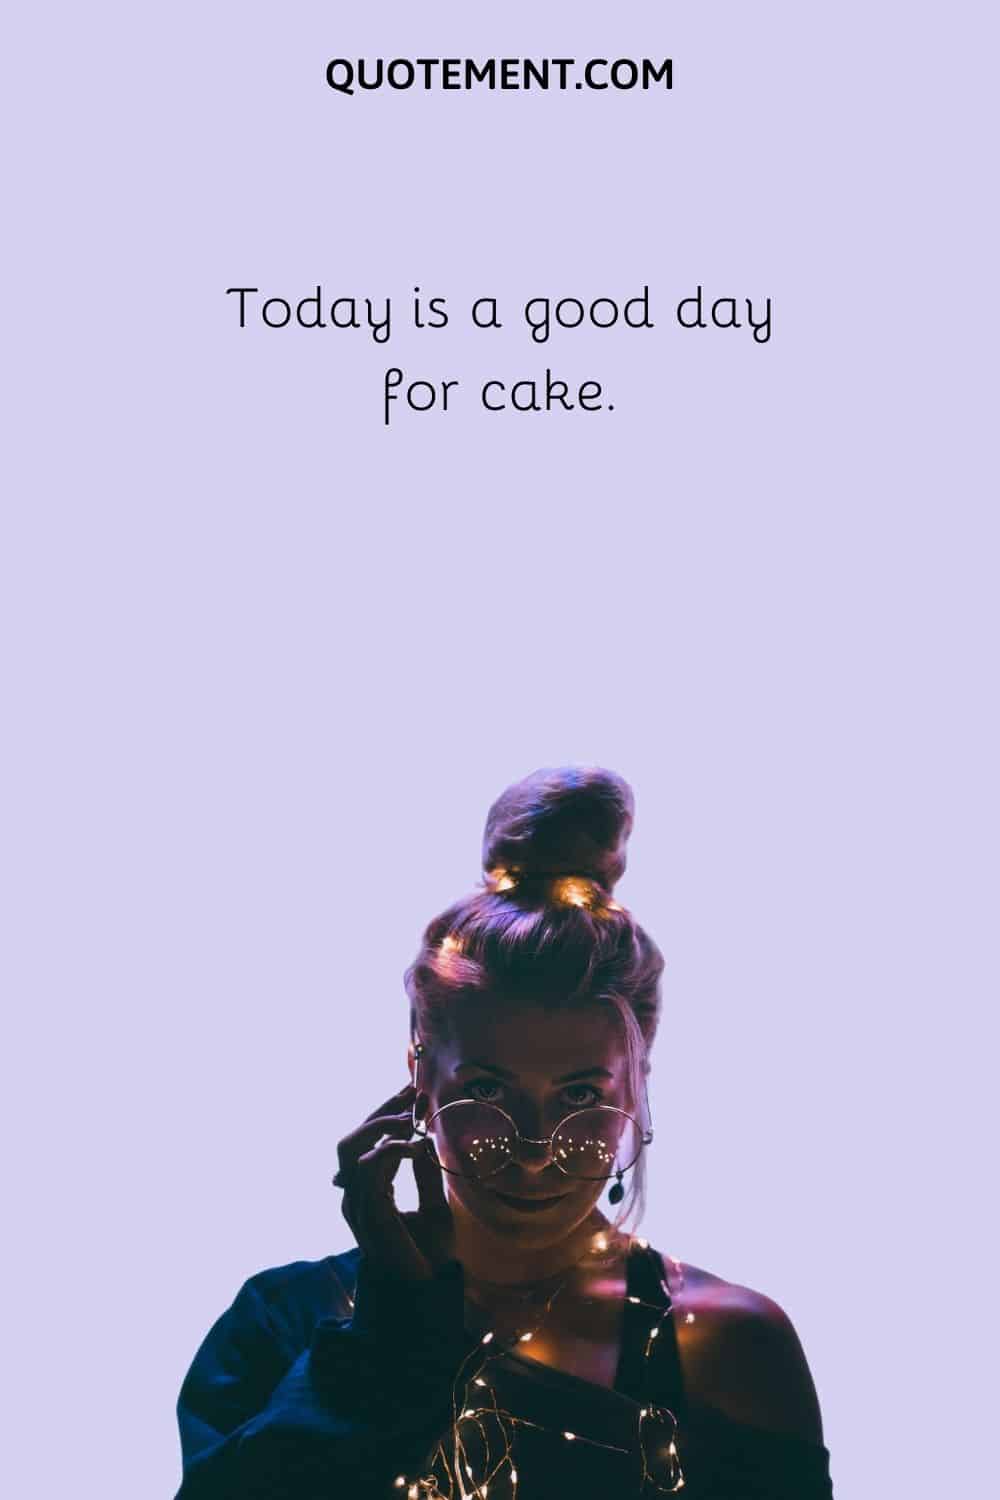 Today is a good day for cake